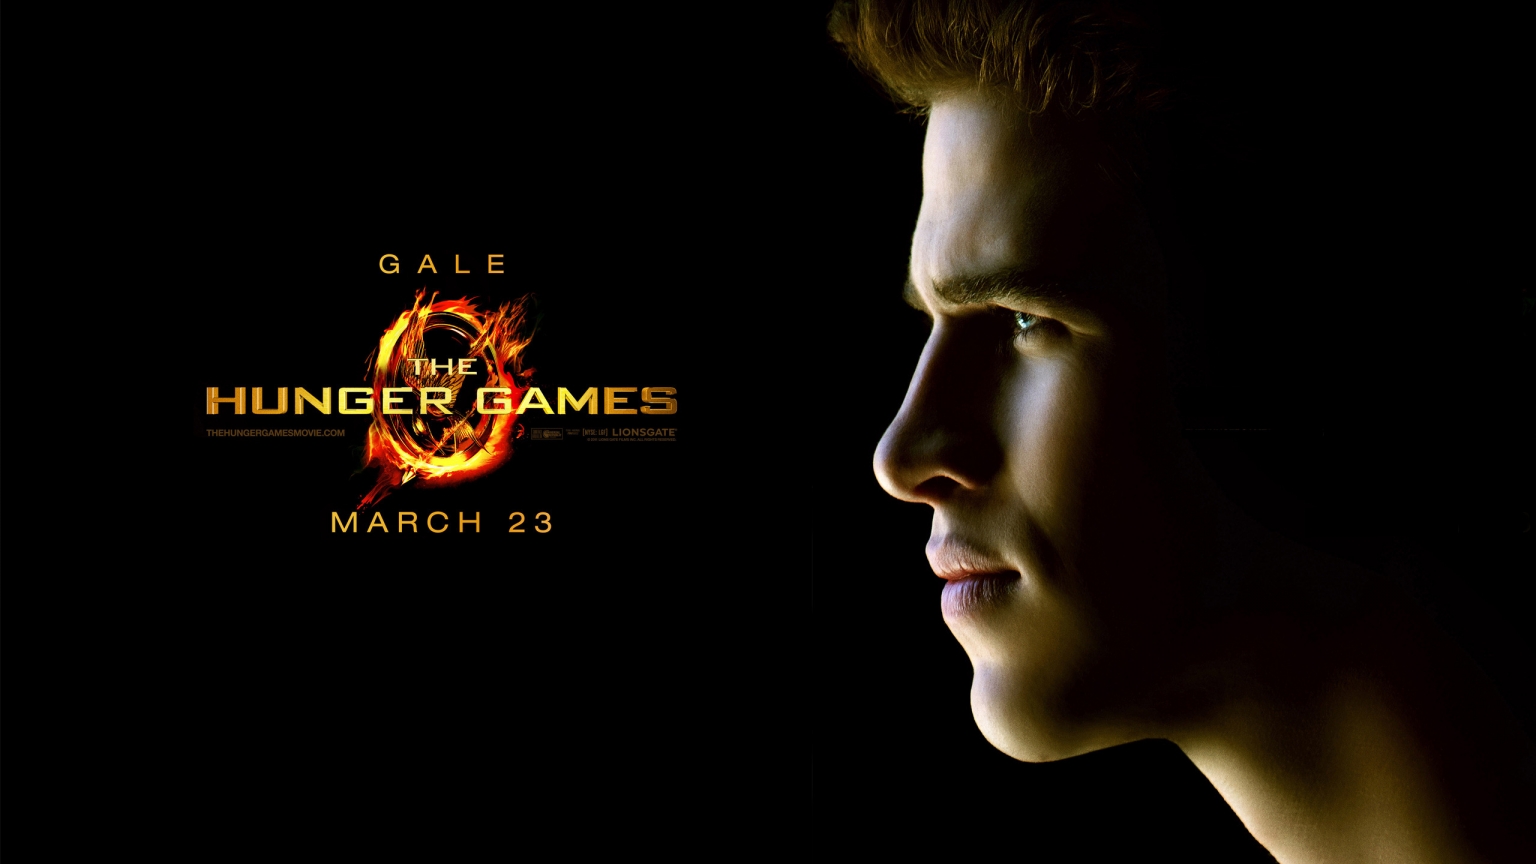 The Hunger Games Gale for 1536 x 864 HDTV resolution